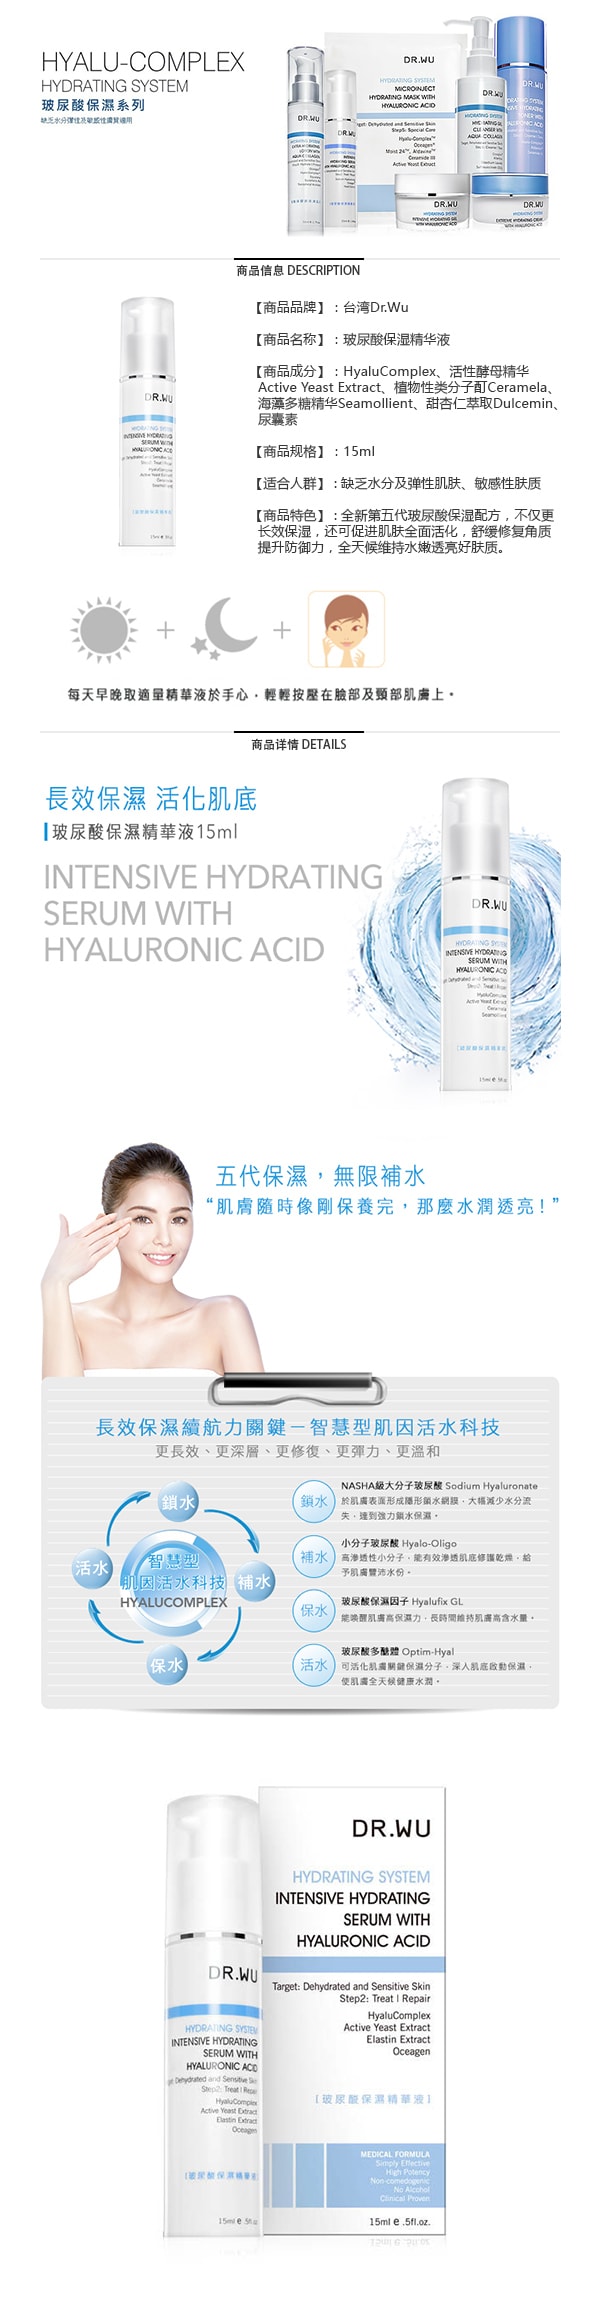 Intensive Hydrating Serum With Hyaluronic Acid 15ml